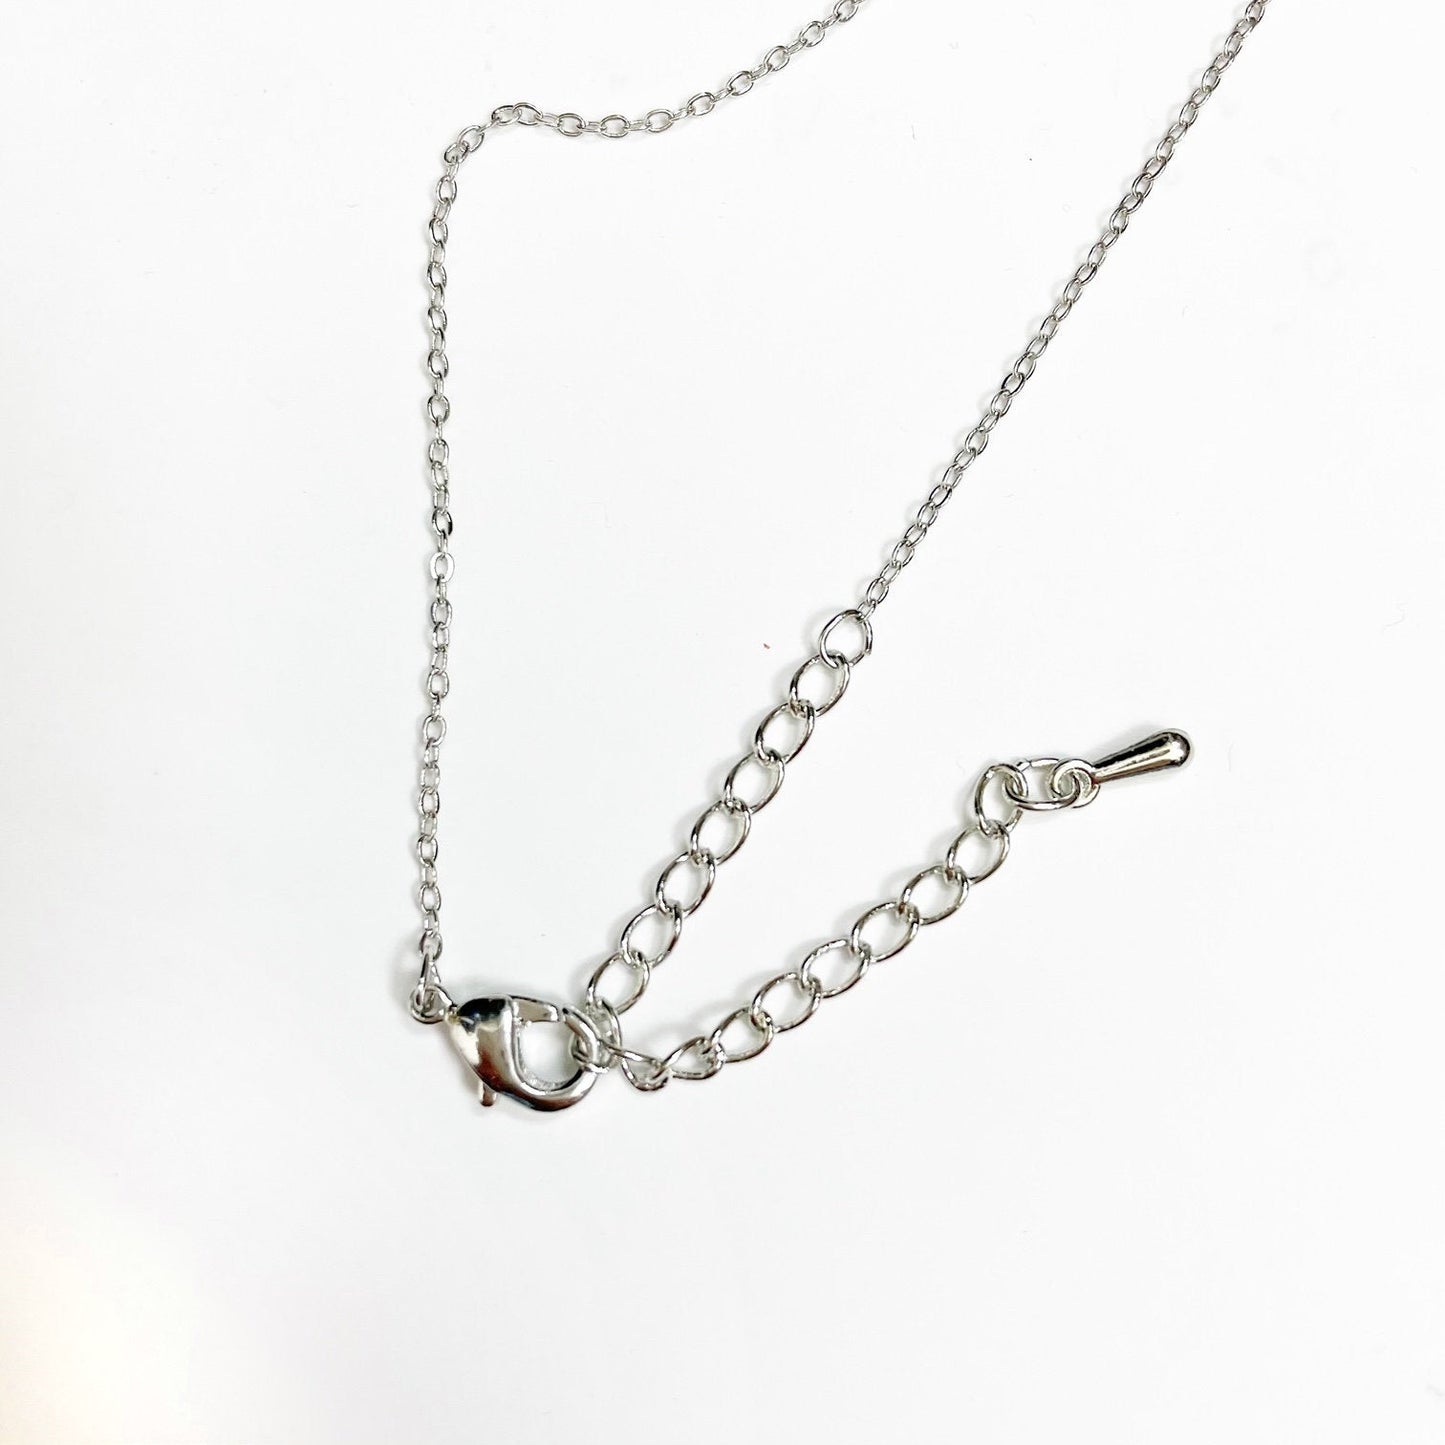 Where You Lead I Will Follow Morse Code Necklace (Silver Plated and Sterling Silver)